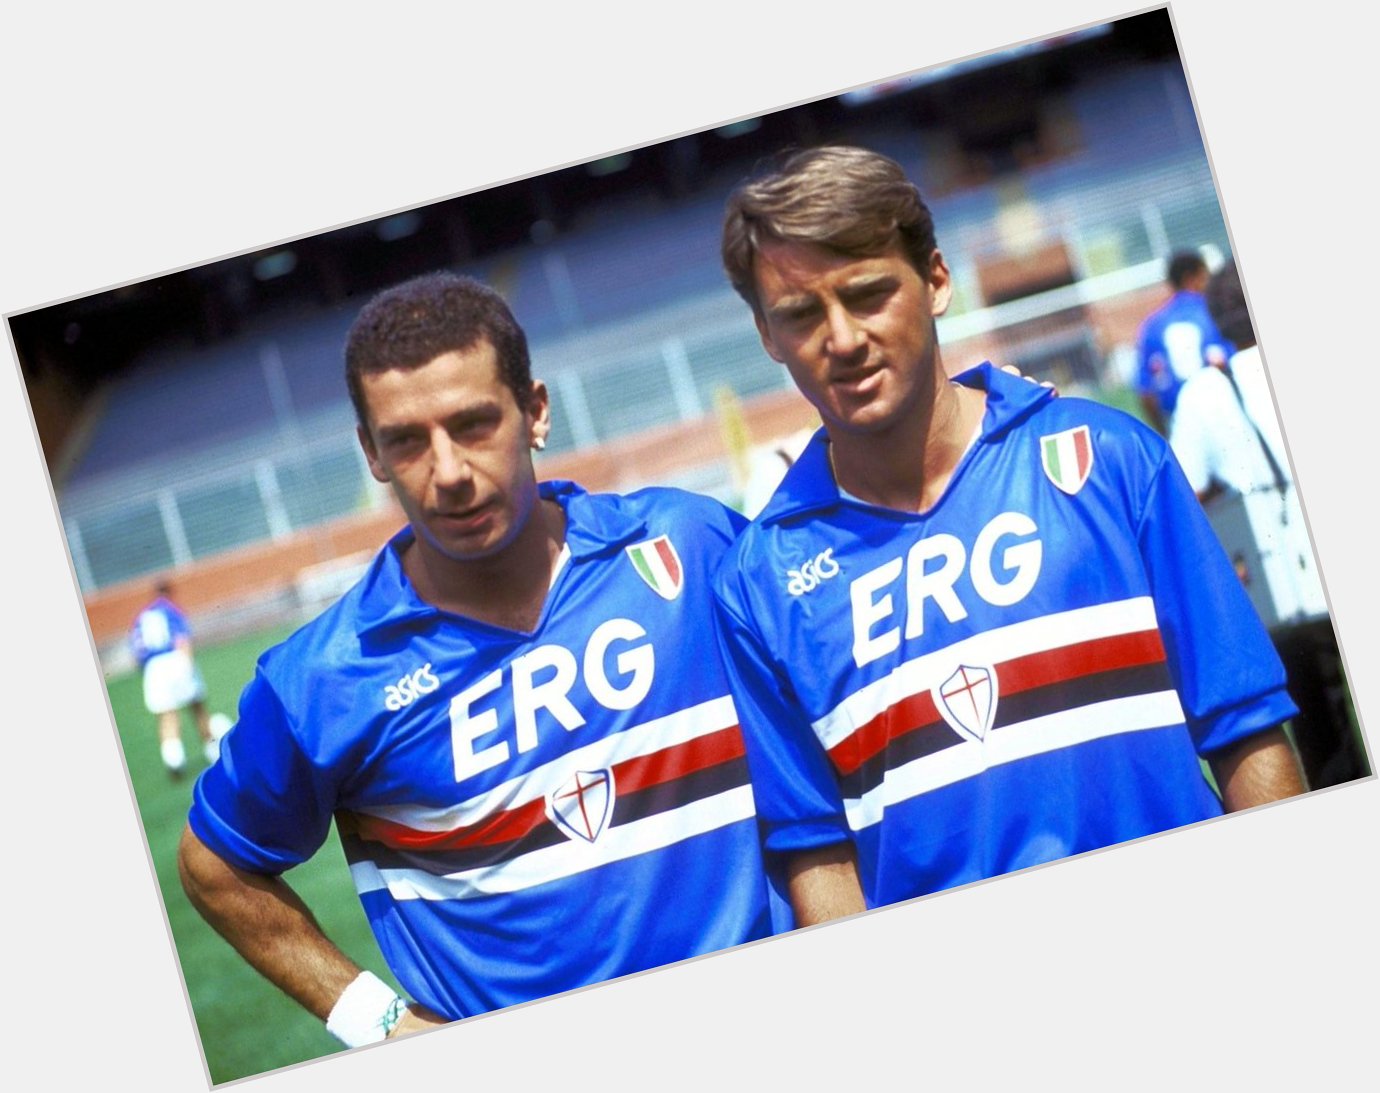 Happy Birthday Roberto Mancini   Here he is with Vialli back in their Sampdoria days 